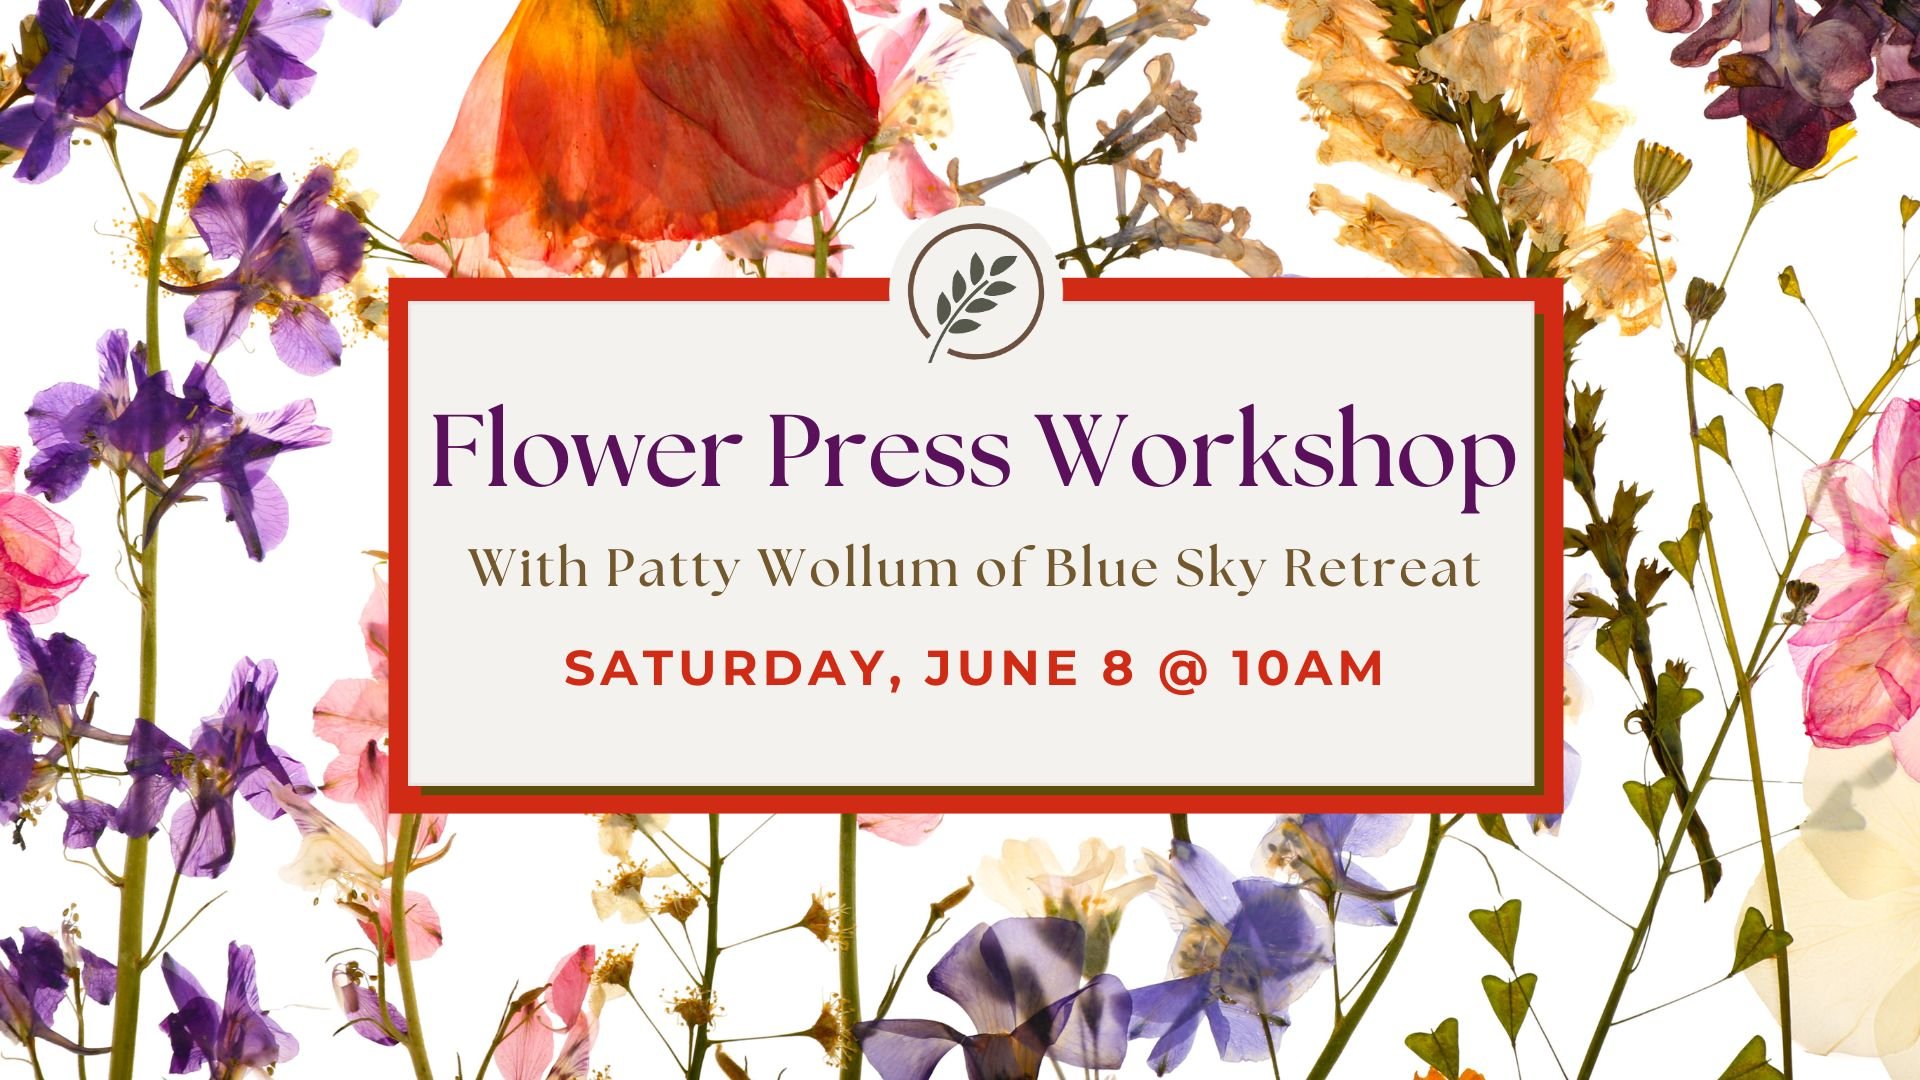 Join guest teacher Patty Wollum of Blue Sky Retreat for this fun + informative hands-on workshop! Preserve the beauty of nature by creating a beautiful flower press &ndash; one so special it may become a family heirloom. A flower press is a great way